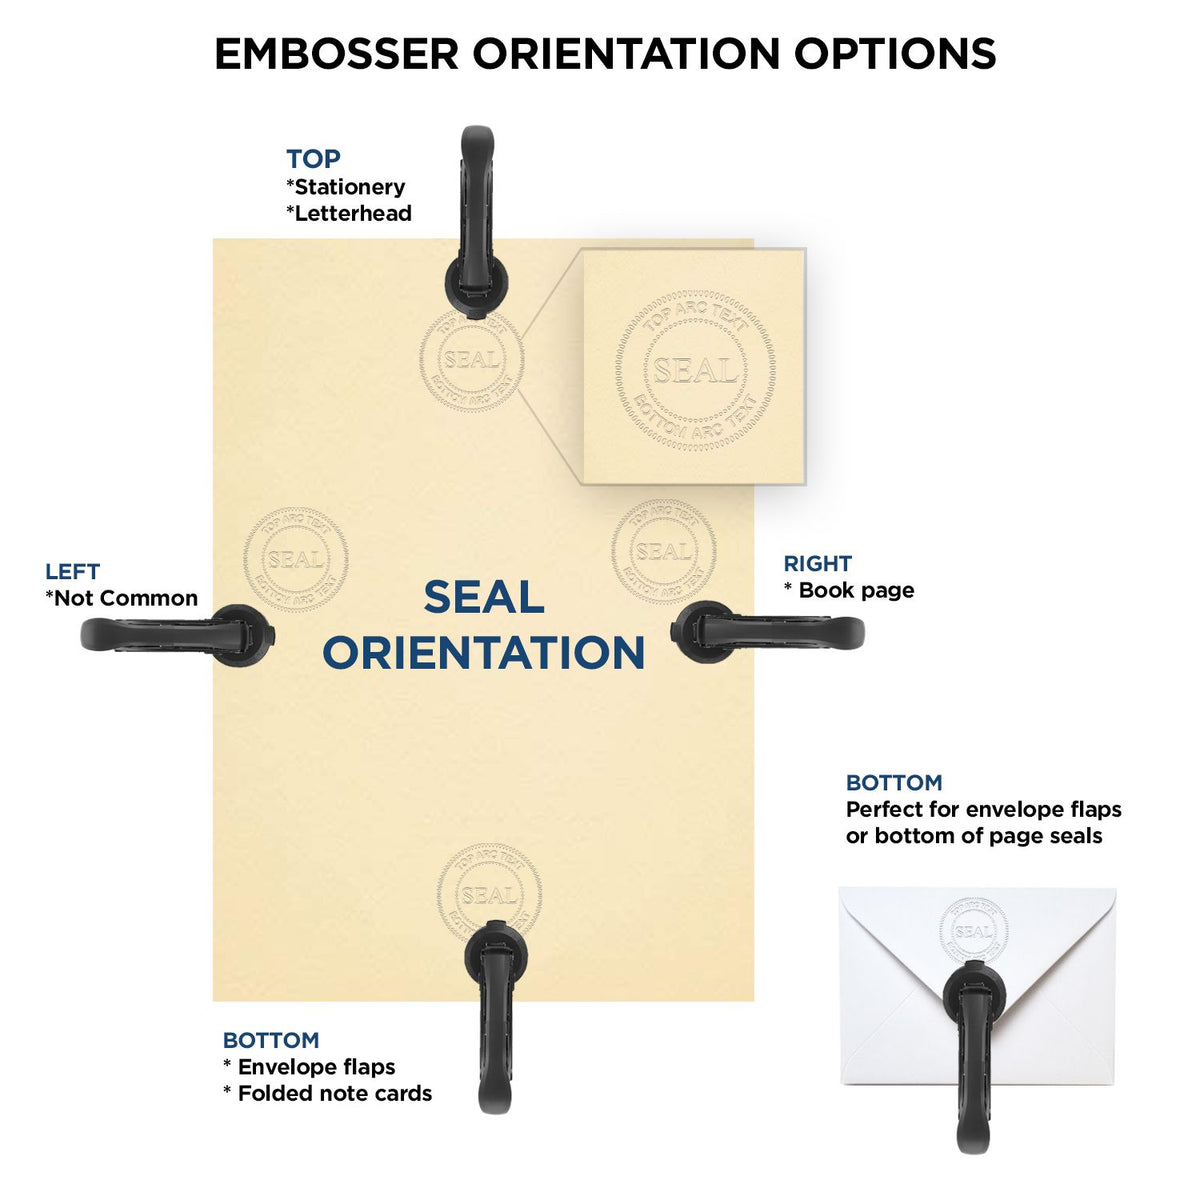 An infographic for the Heavy Duty Cast Iron Indiana Geologist Seal Embosser showing embosser orientation, this is showing examples of a top, bottom, right and left insert.